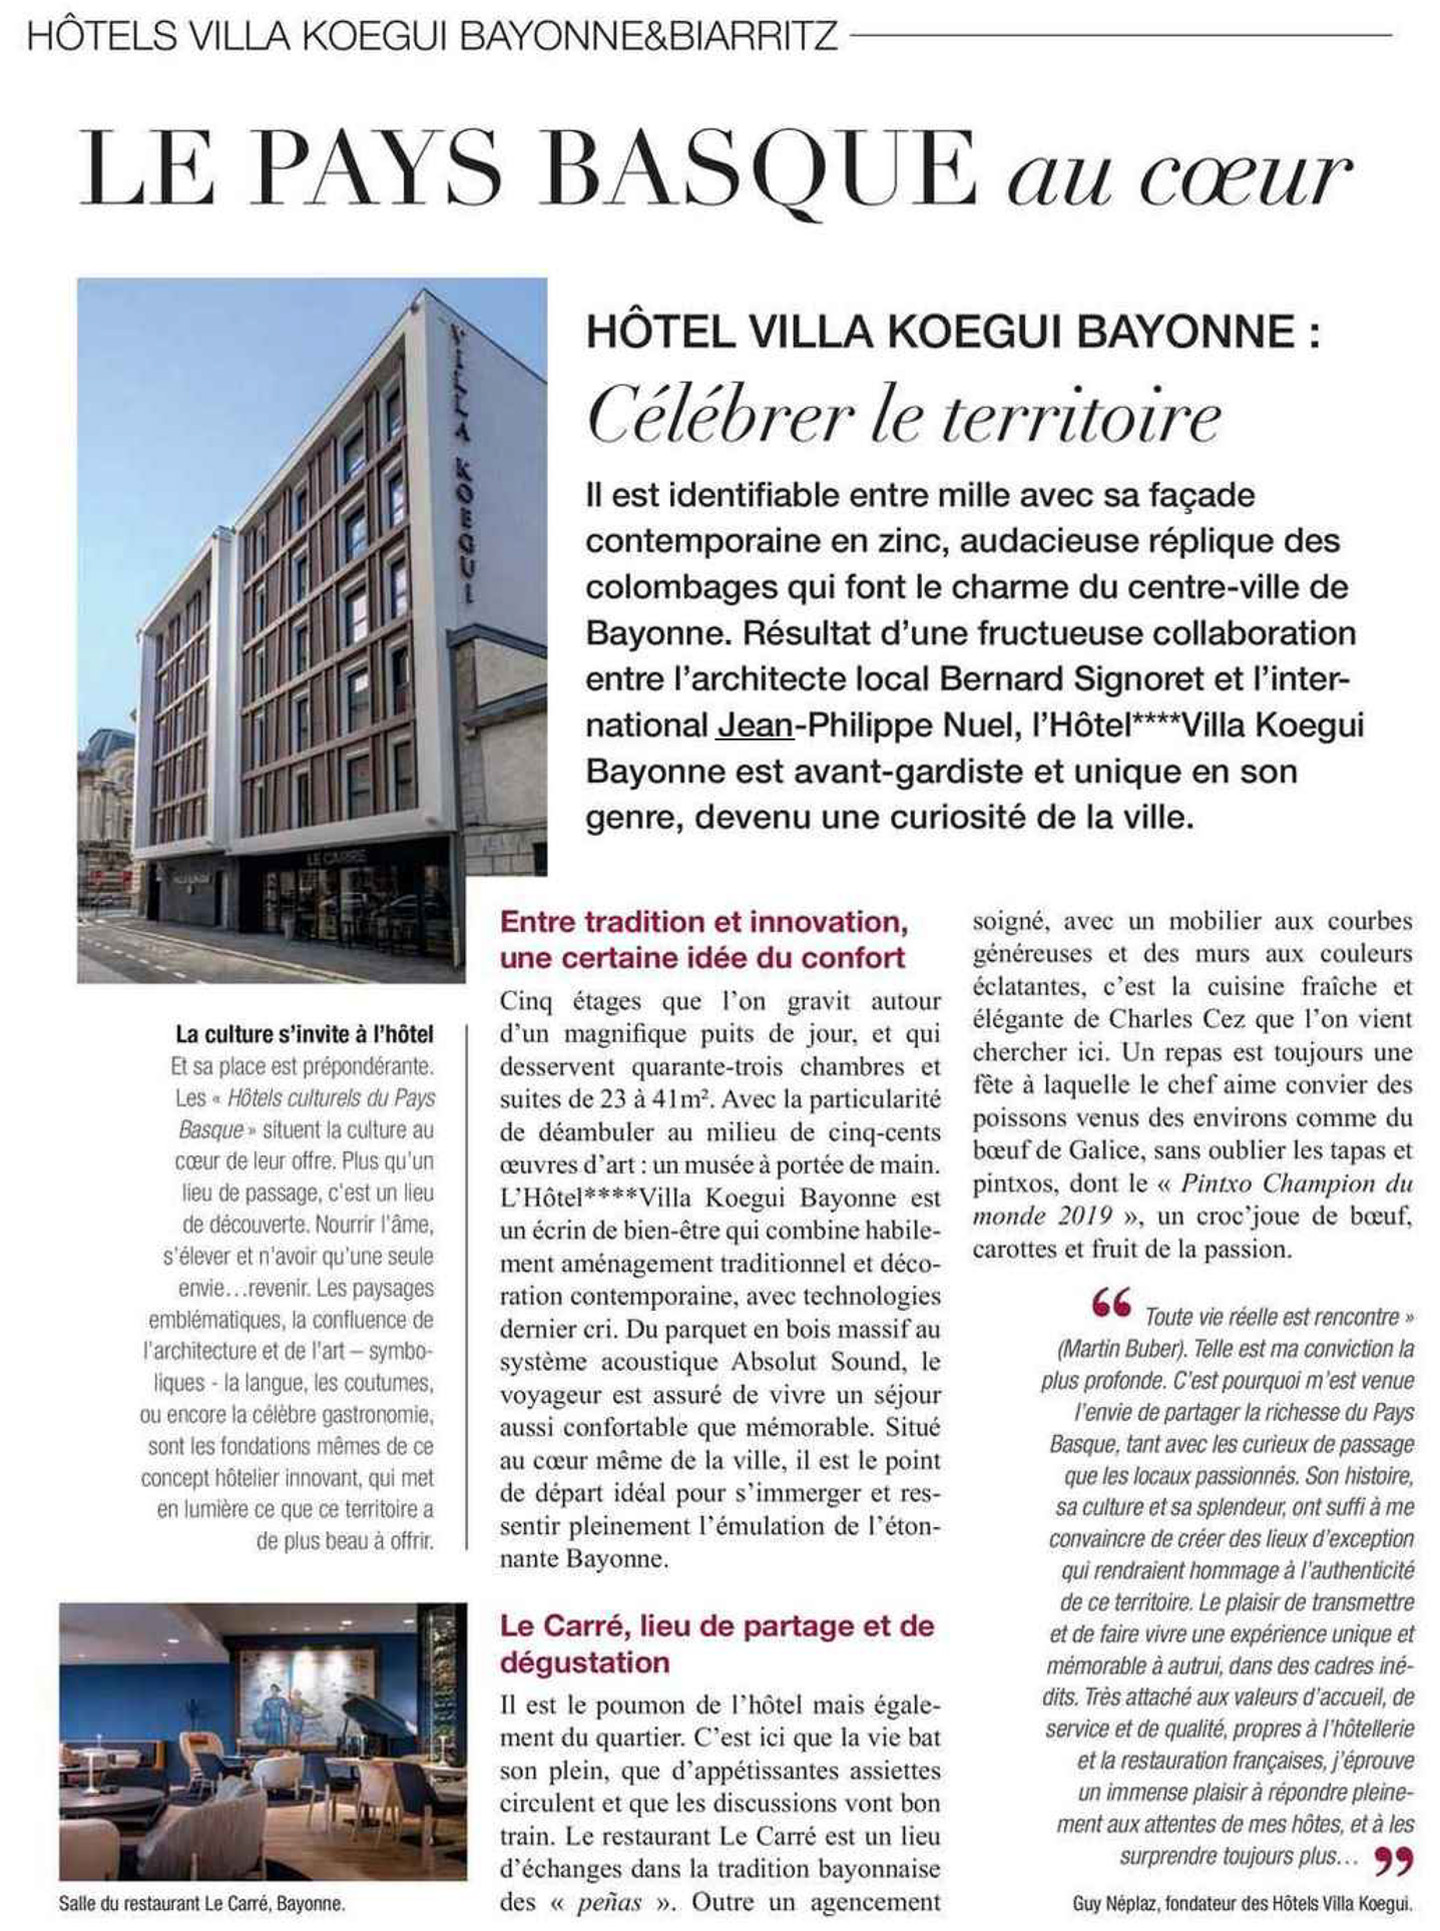 Article on the villa koegui bayonne in the figaro magazine aquitaine, lifestyle hotel in the french basque country designed by the interior design studio jean-philippe nuel